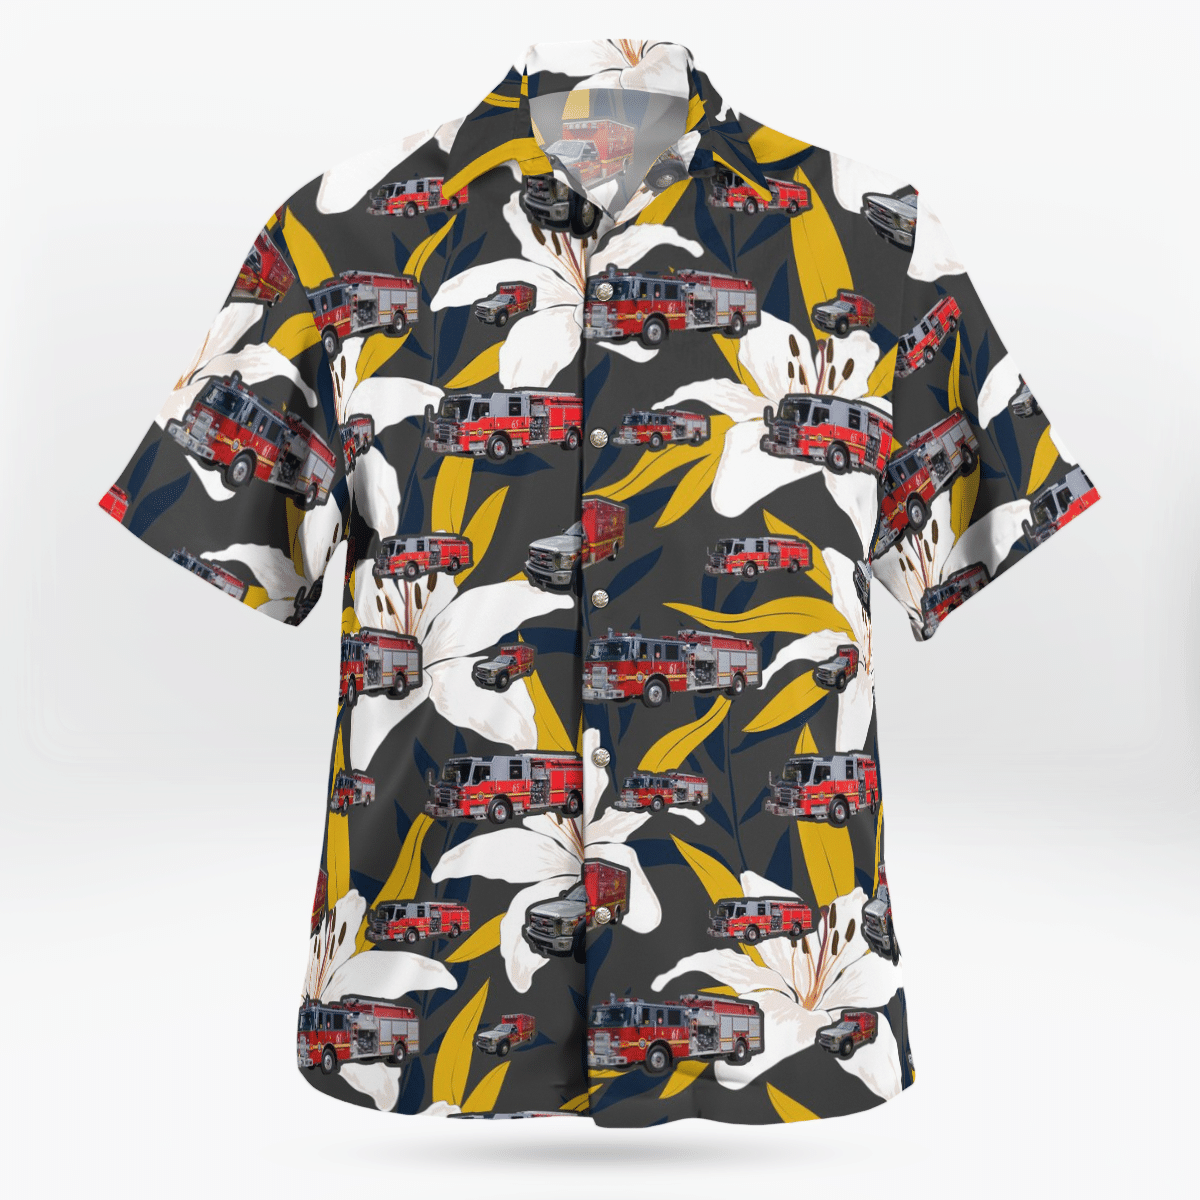 Hawaiian shirts never go out of style 24